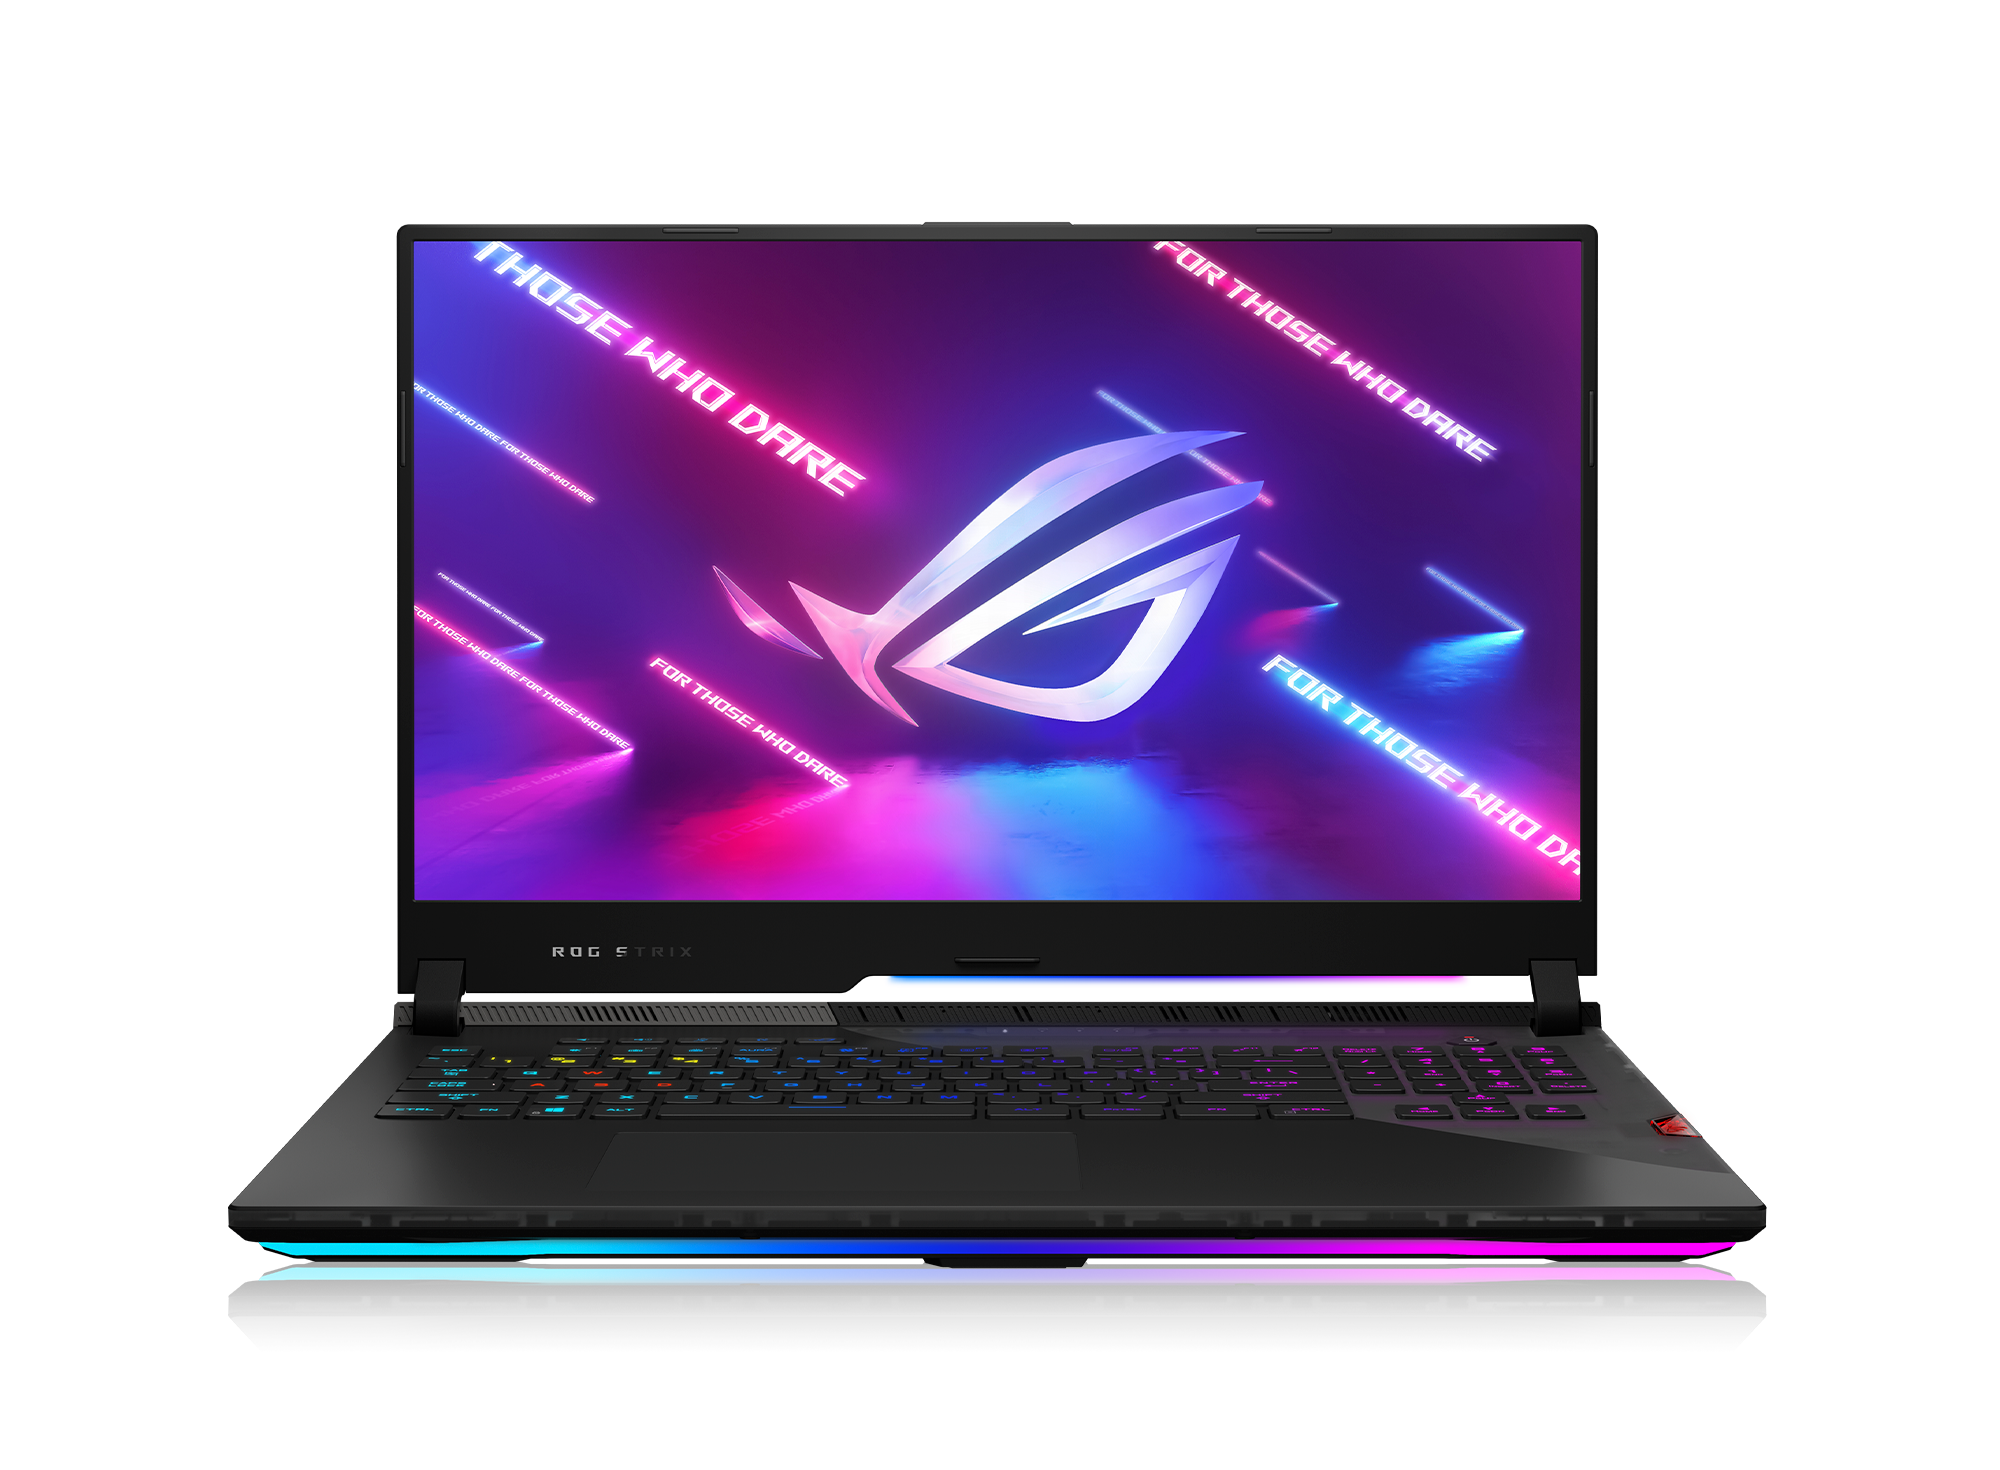 ASUS ROG For Those Who Dare: The Rise Of Gamers Virtual Launch Event During CES 2022 